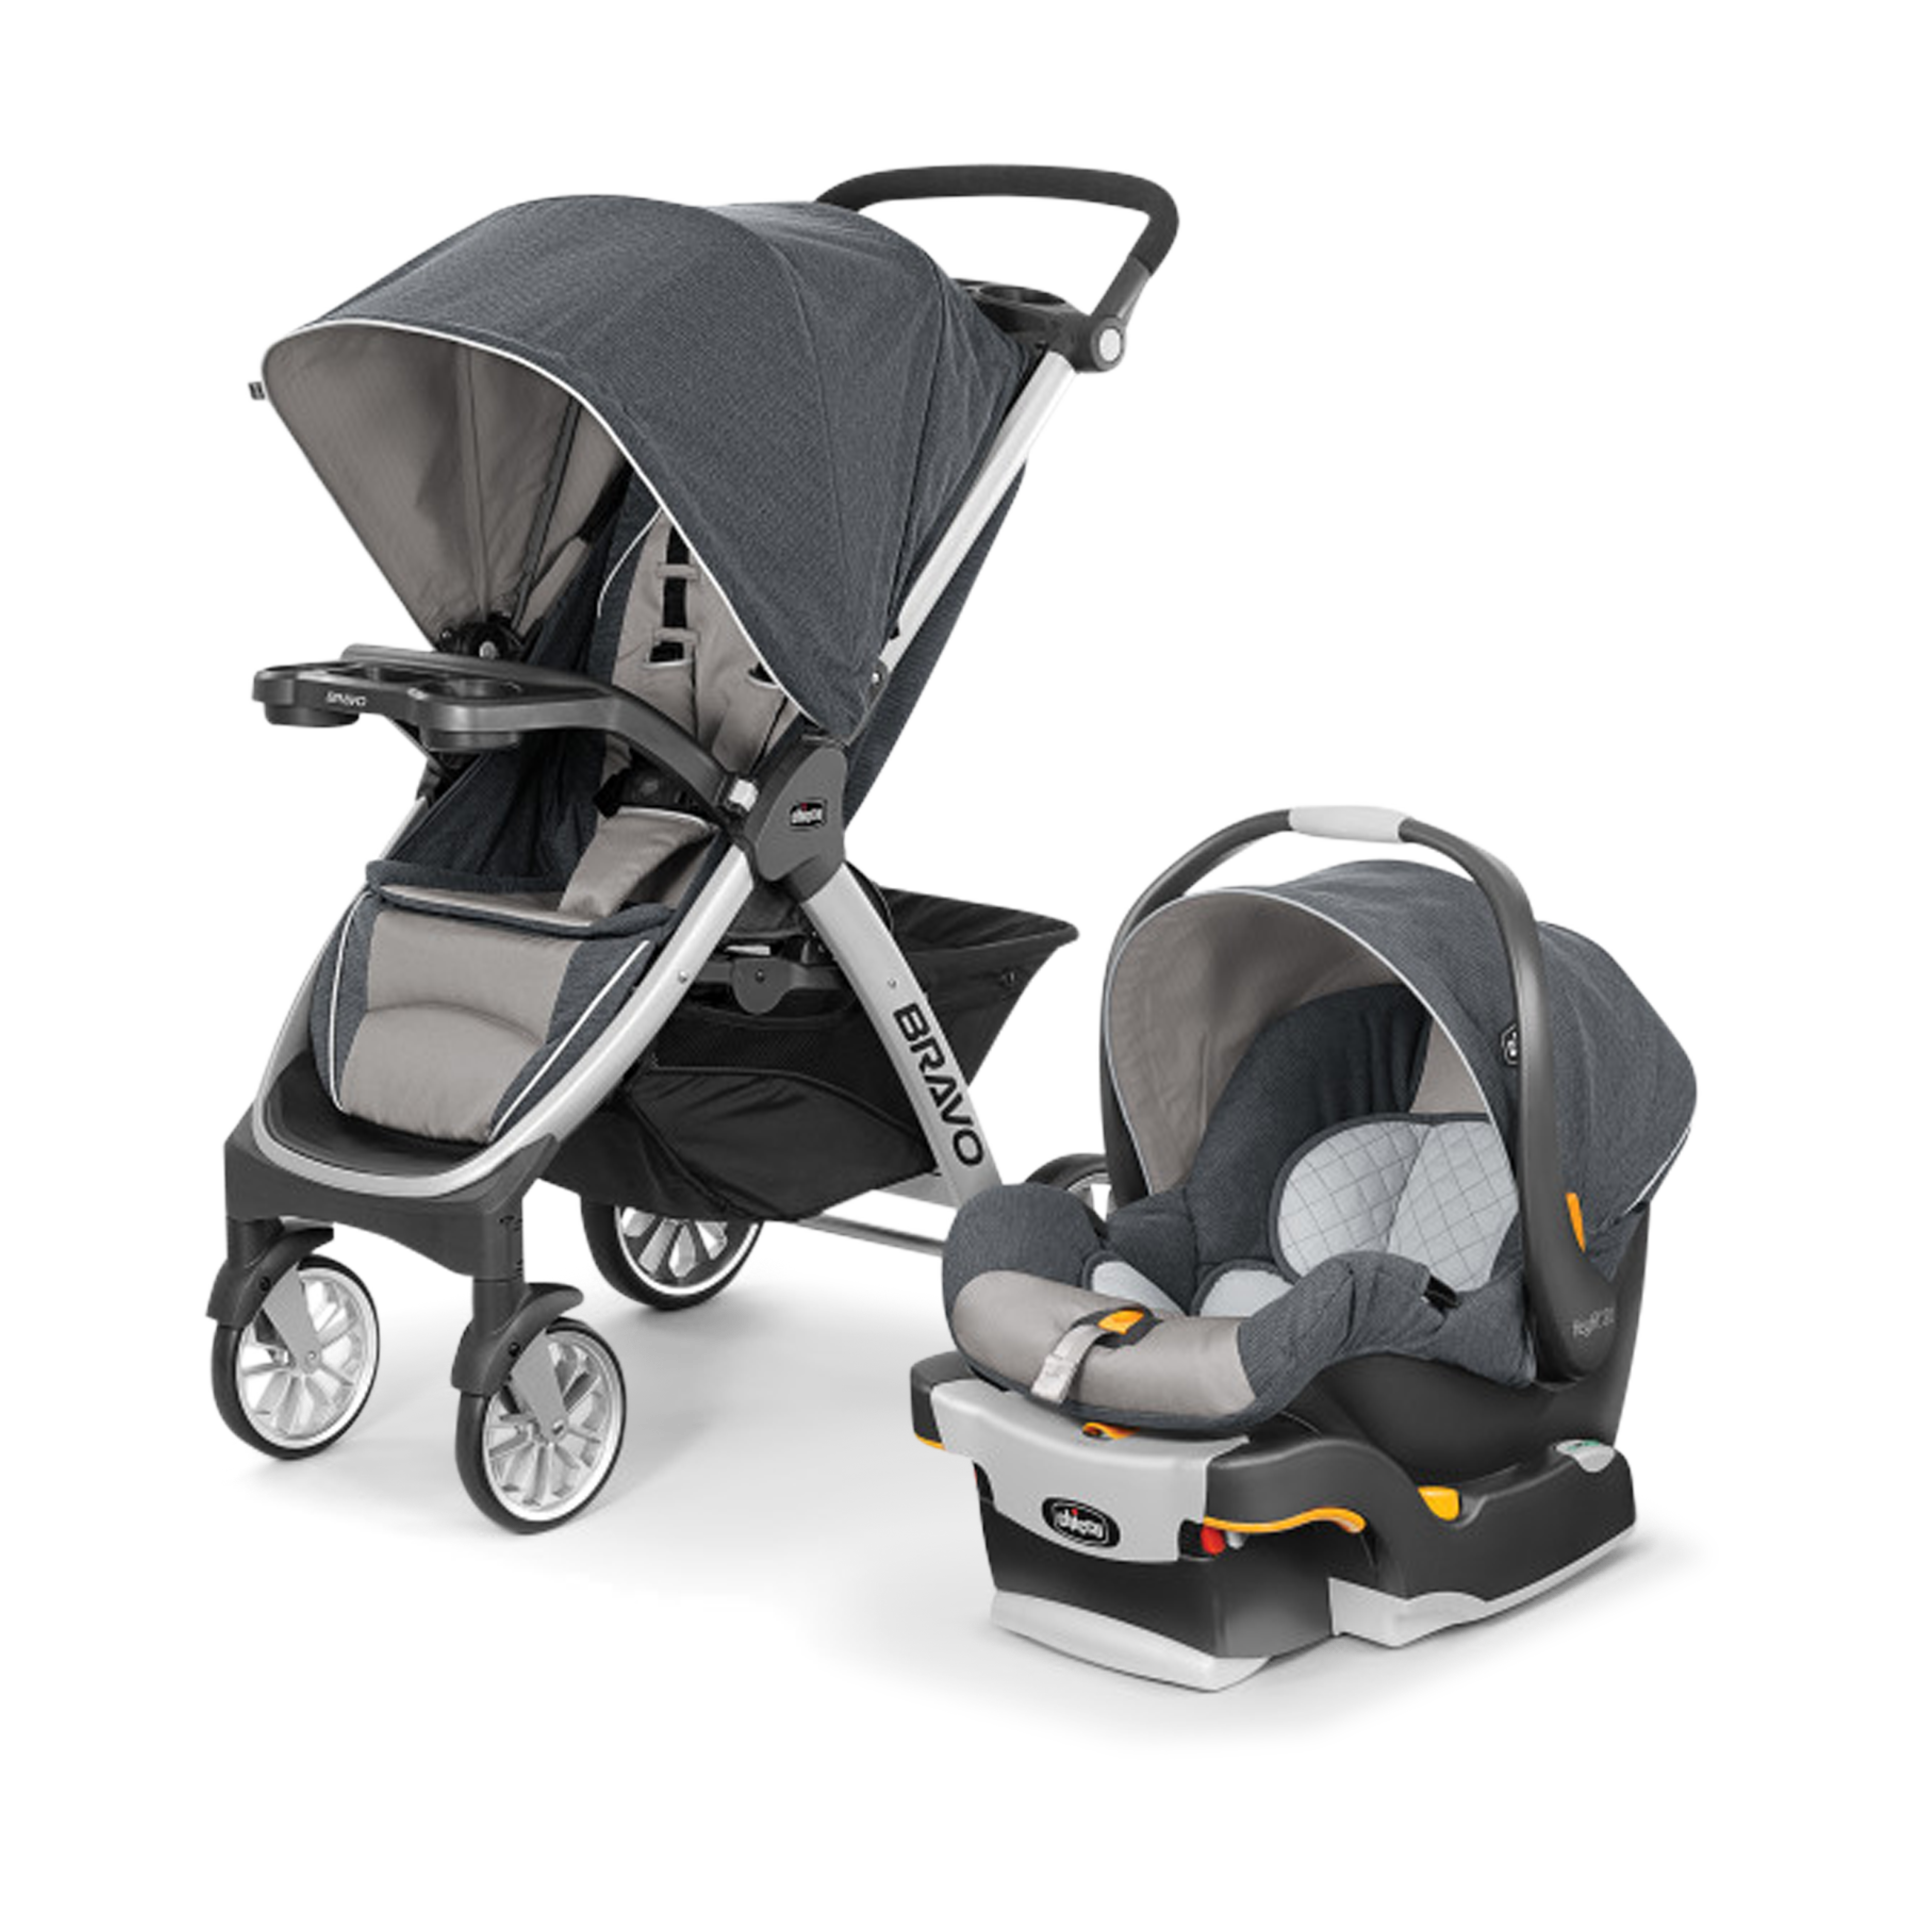 Best Strollers Car Seats Combos, Top Strollers And Car Seats 2020